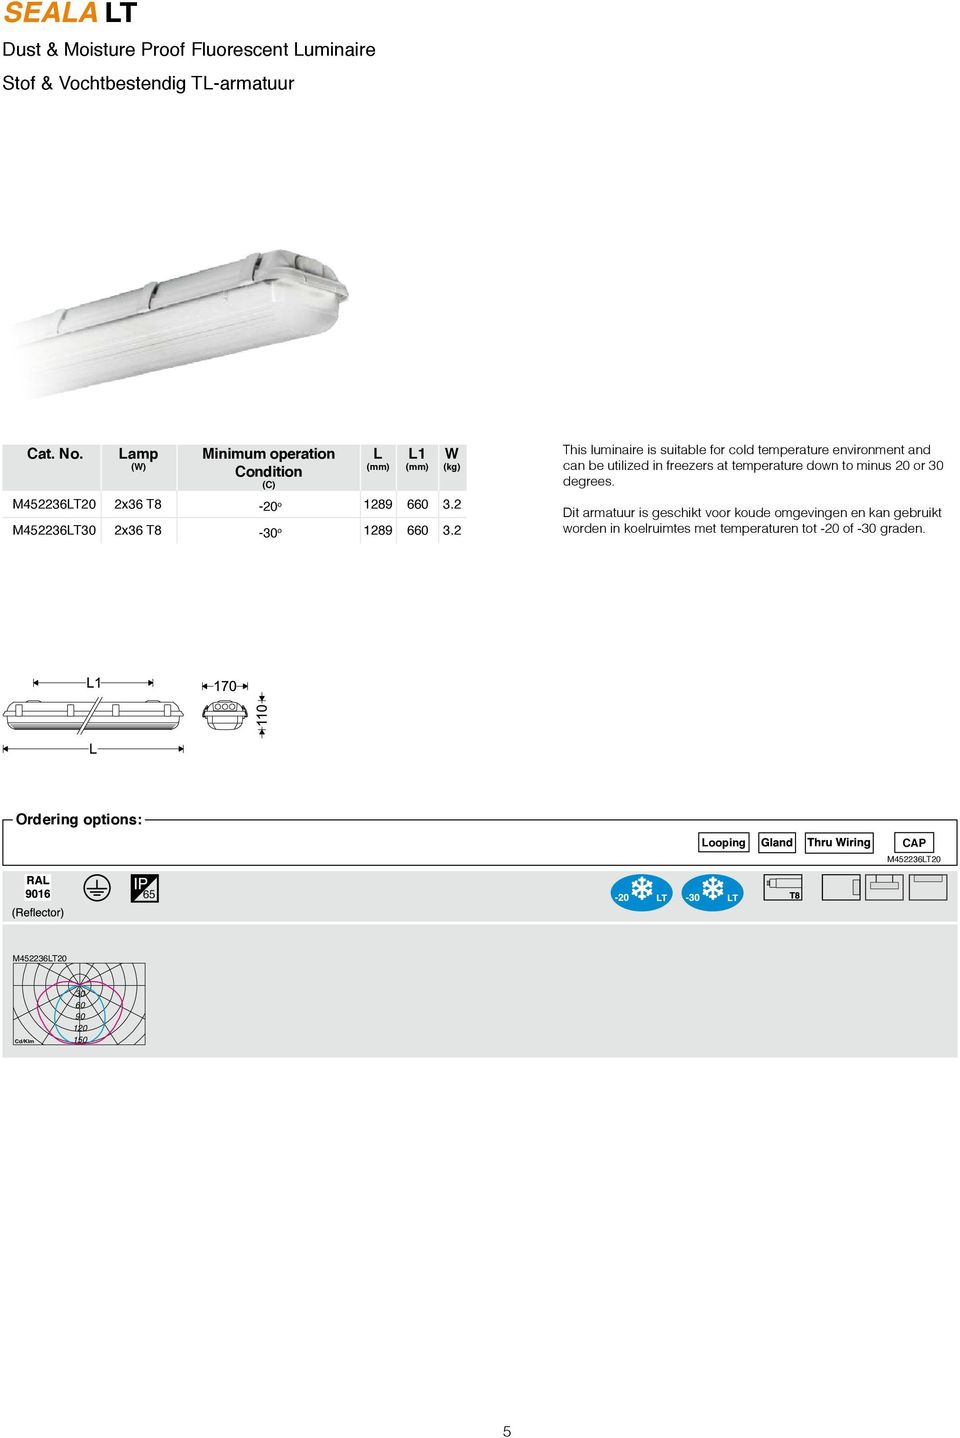 2 This luminaire is suitable for cold temperature environment and can be utilized in freezers at temperature down to minus 20